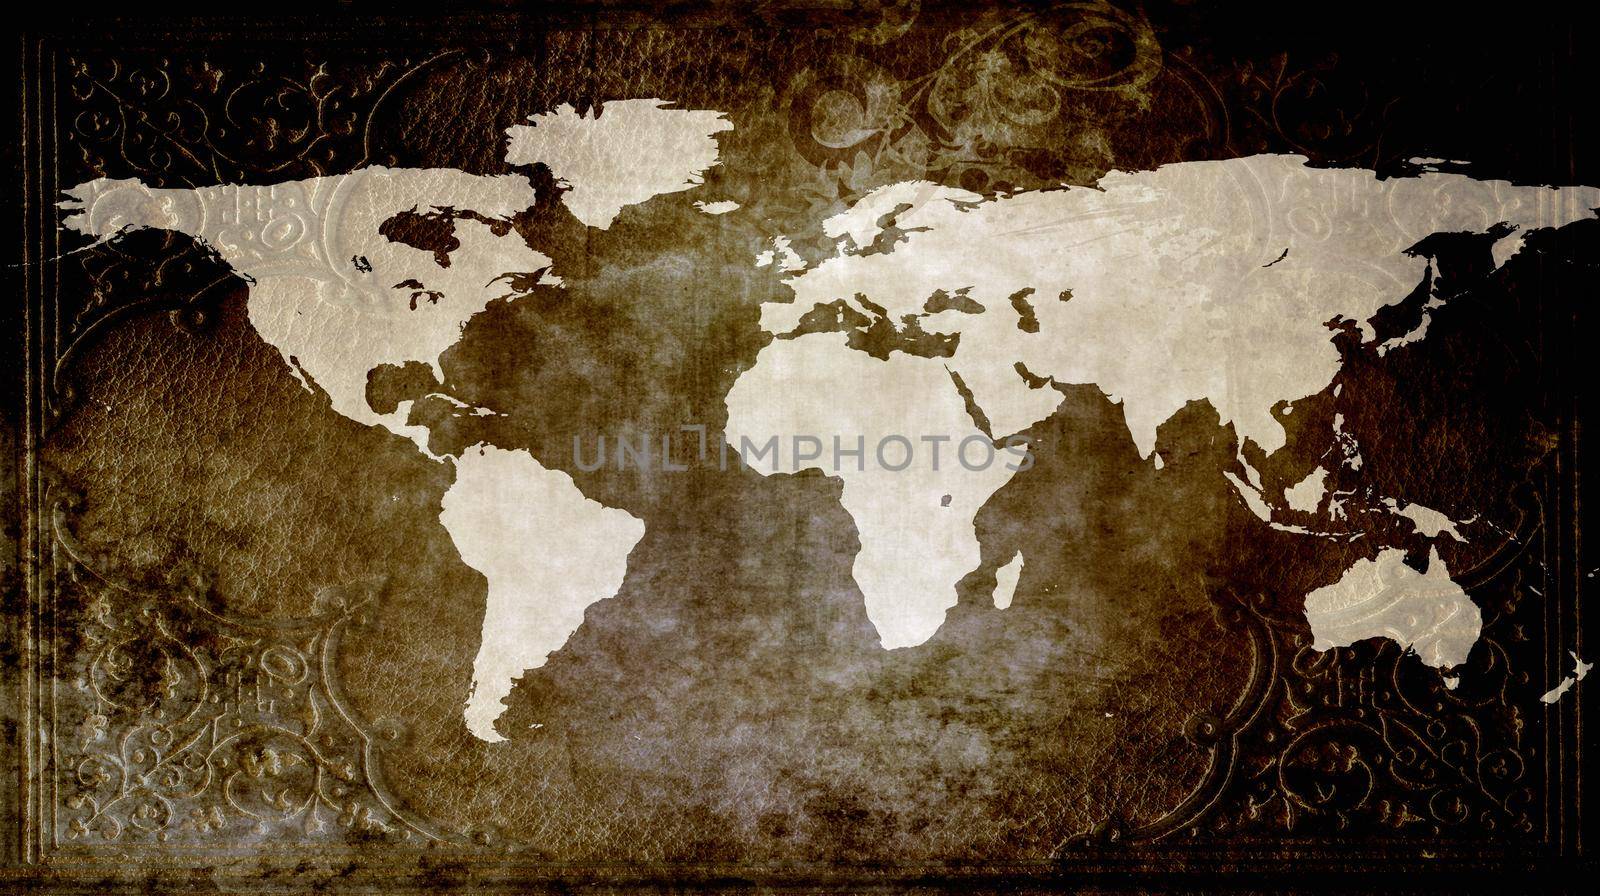 Mapping the world. A map of the world. by YuriArcurs